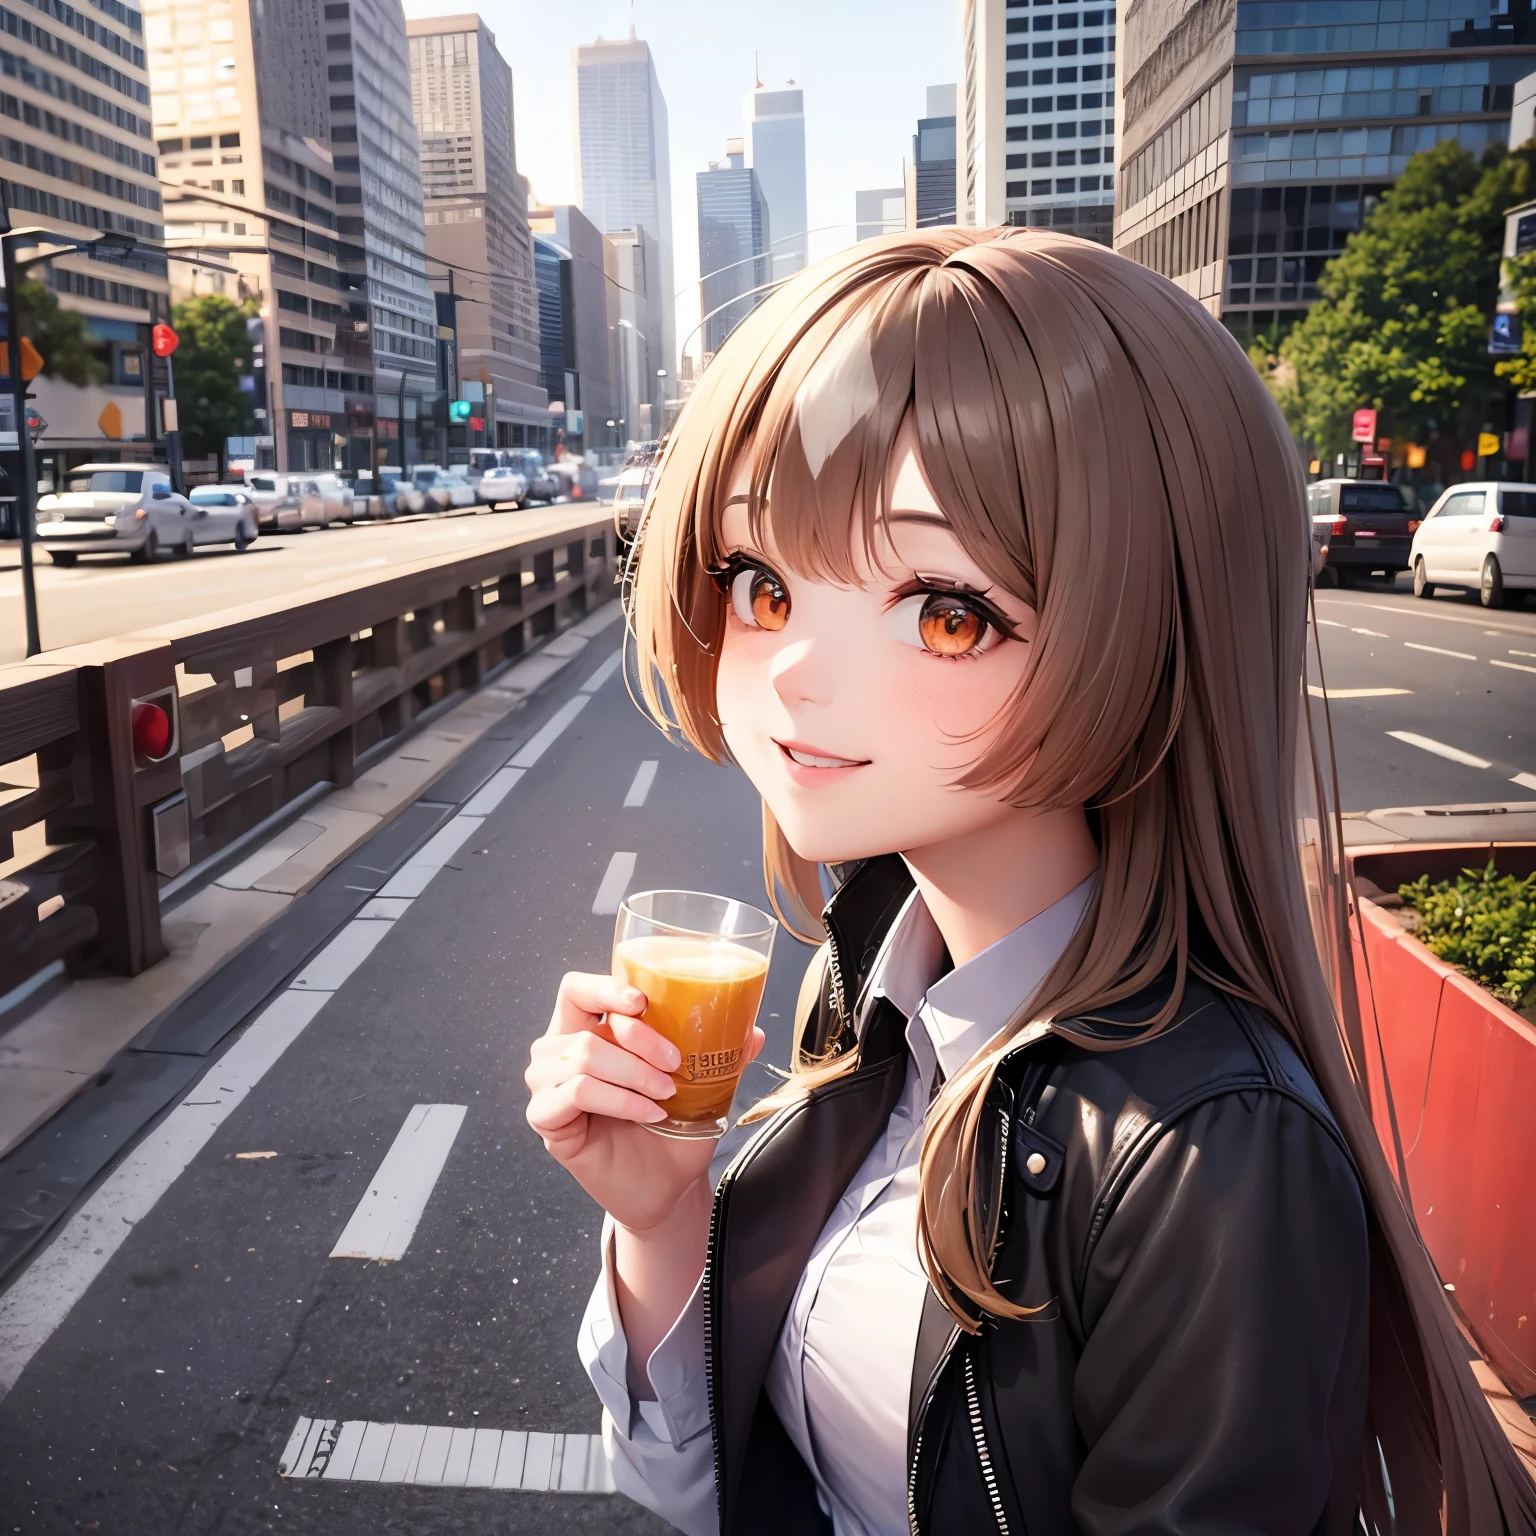 Amidst the urban chaos, a moment of grace. Her smile brings warmth to the heart, momentarily forgetting the city's noise,Top quality, masterpiece, ultra-high resolution,